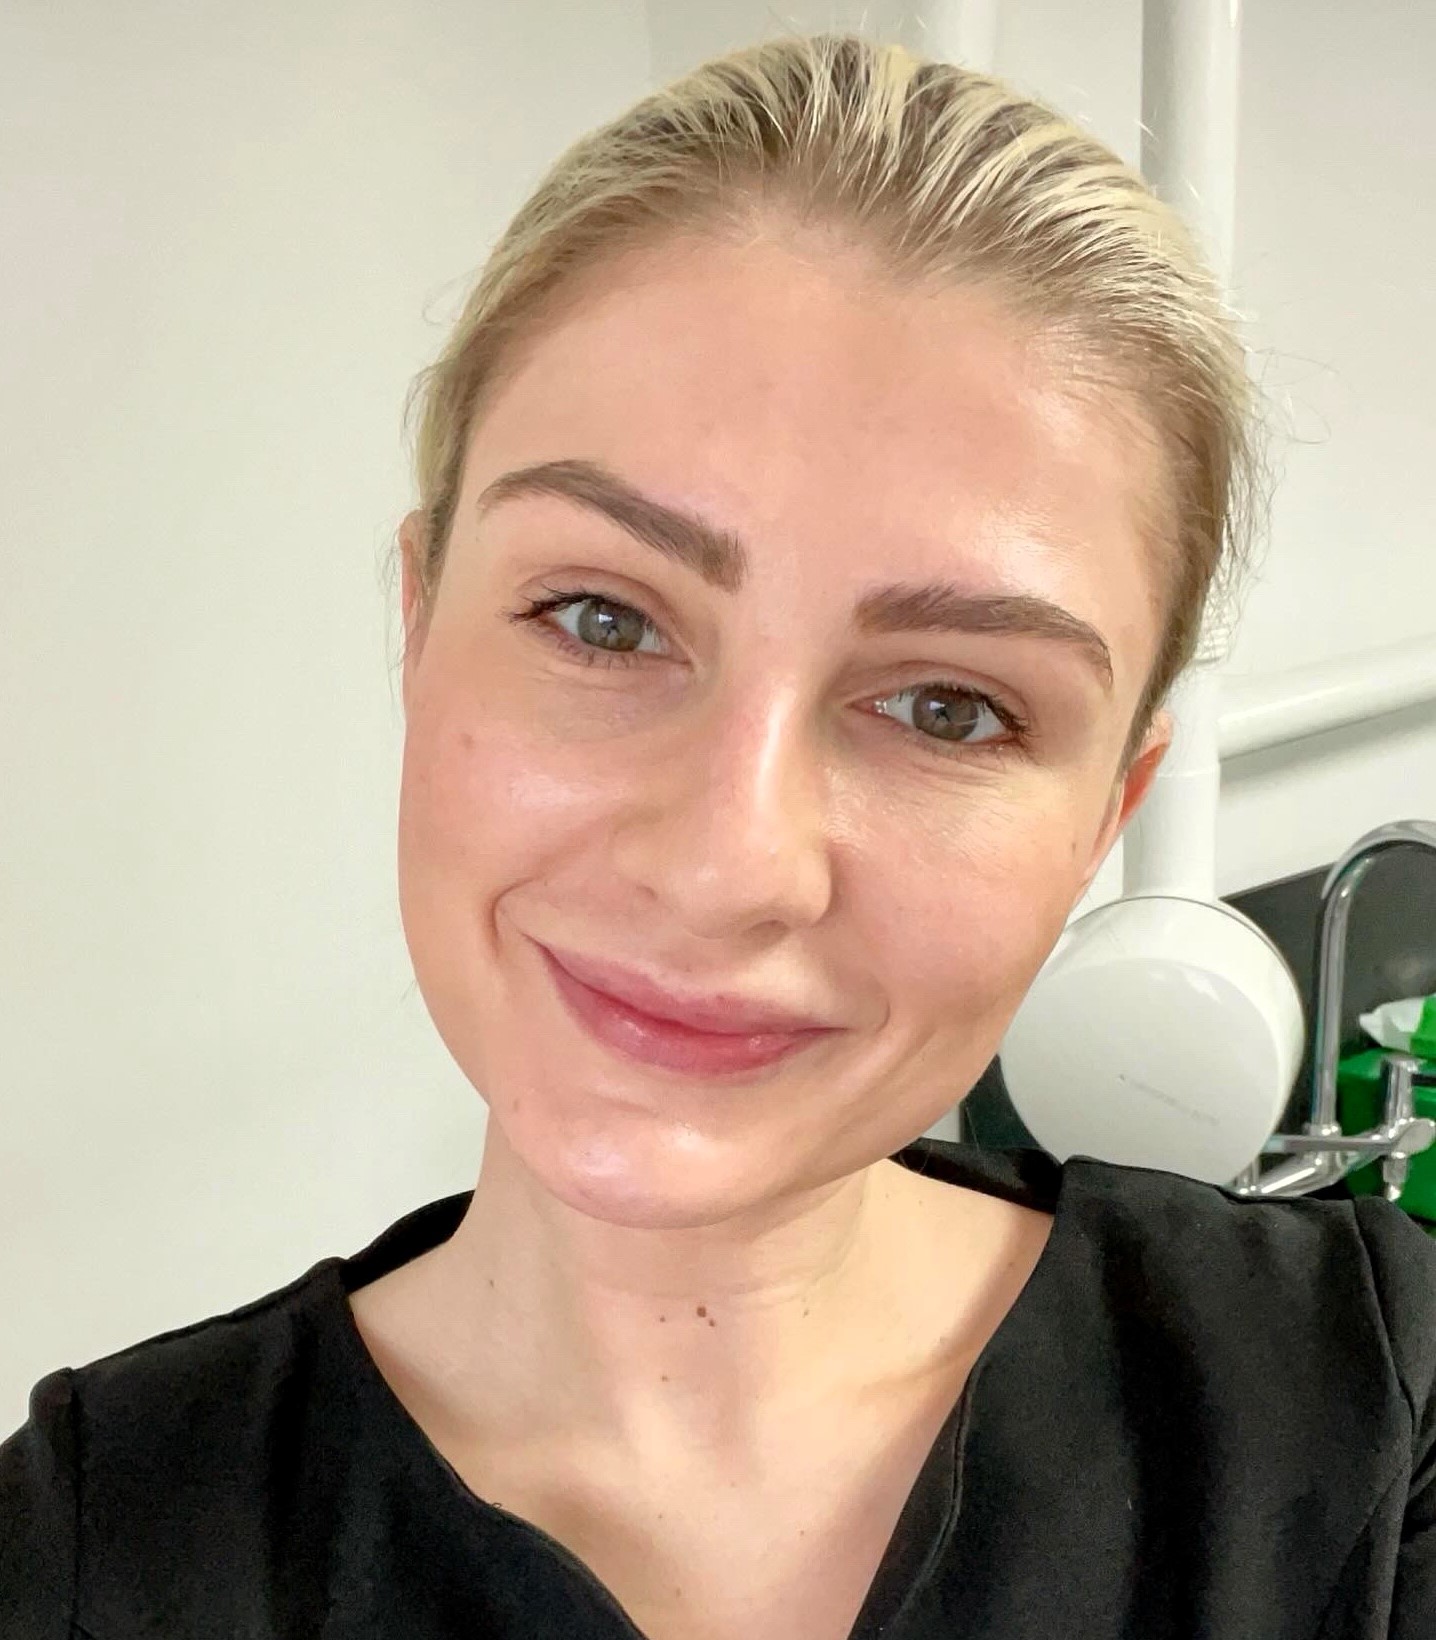 Skincare specialist warns against trendy treatments like microneedling, hydrafacials, and face yoga. Learn why these popular procedures may not be worth it.